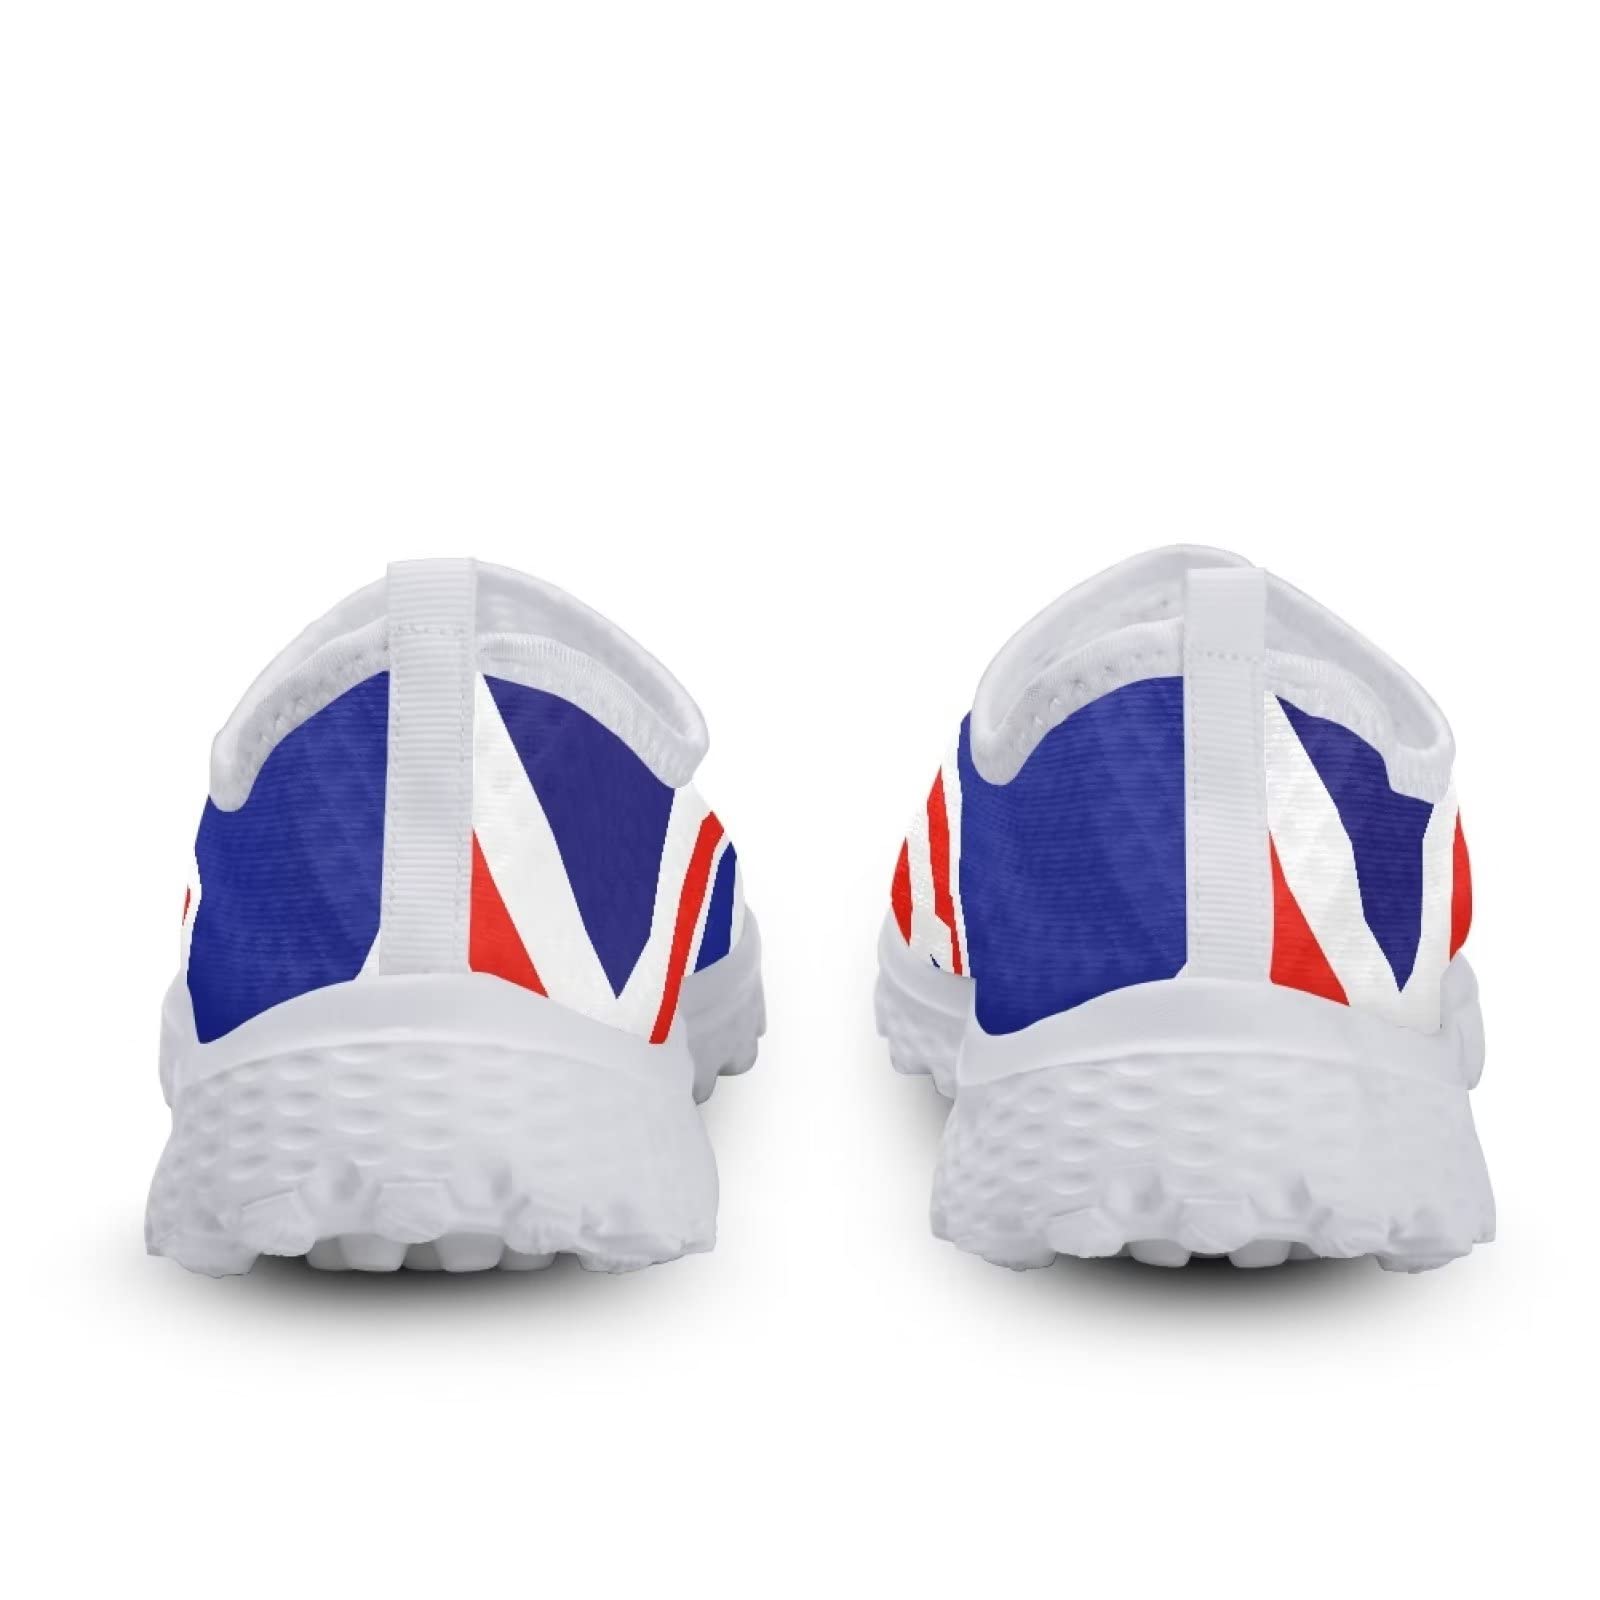 KEIAHUAN Women's Running Shoes Non Slip Athletic Tennis Shoes Sneakers Union Jack Bow Pattern Lightweight Breathable Mesh Knit Running Shoes